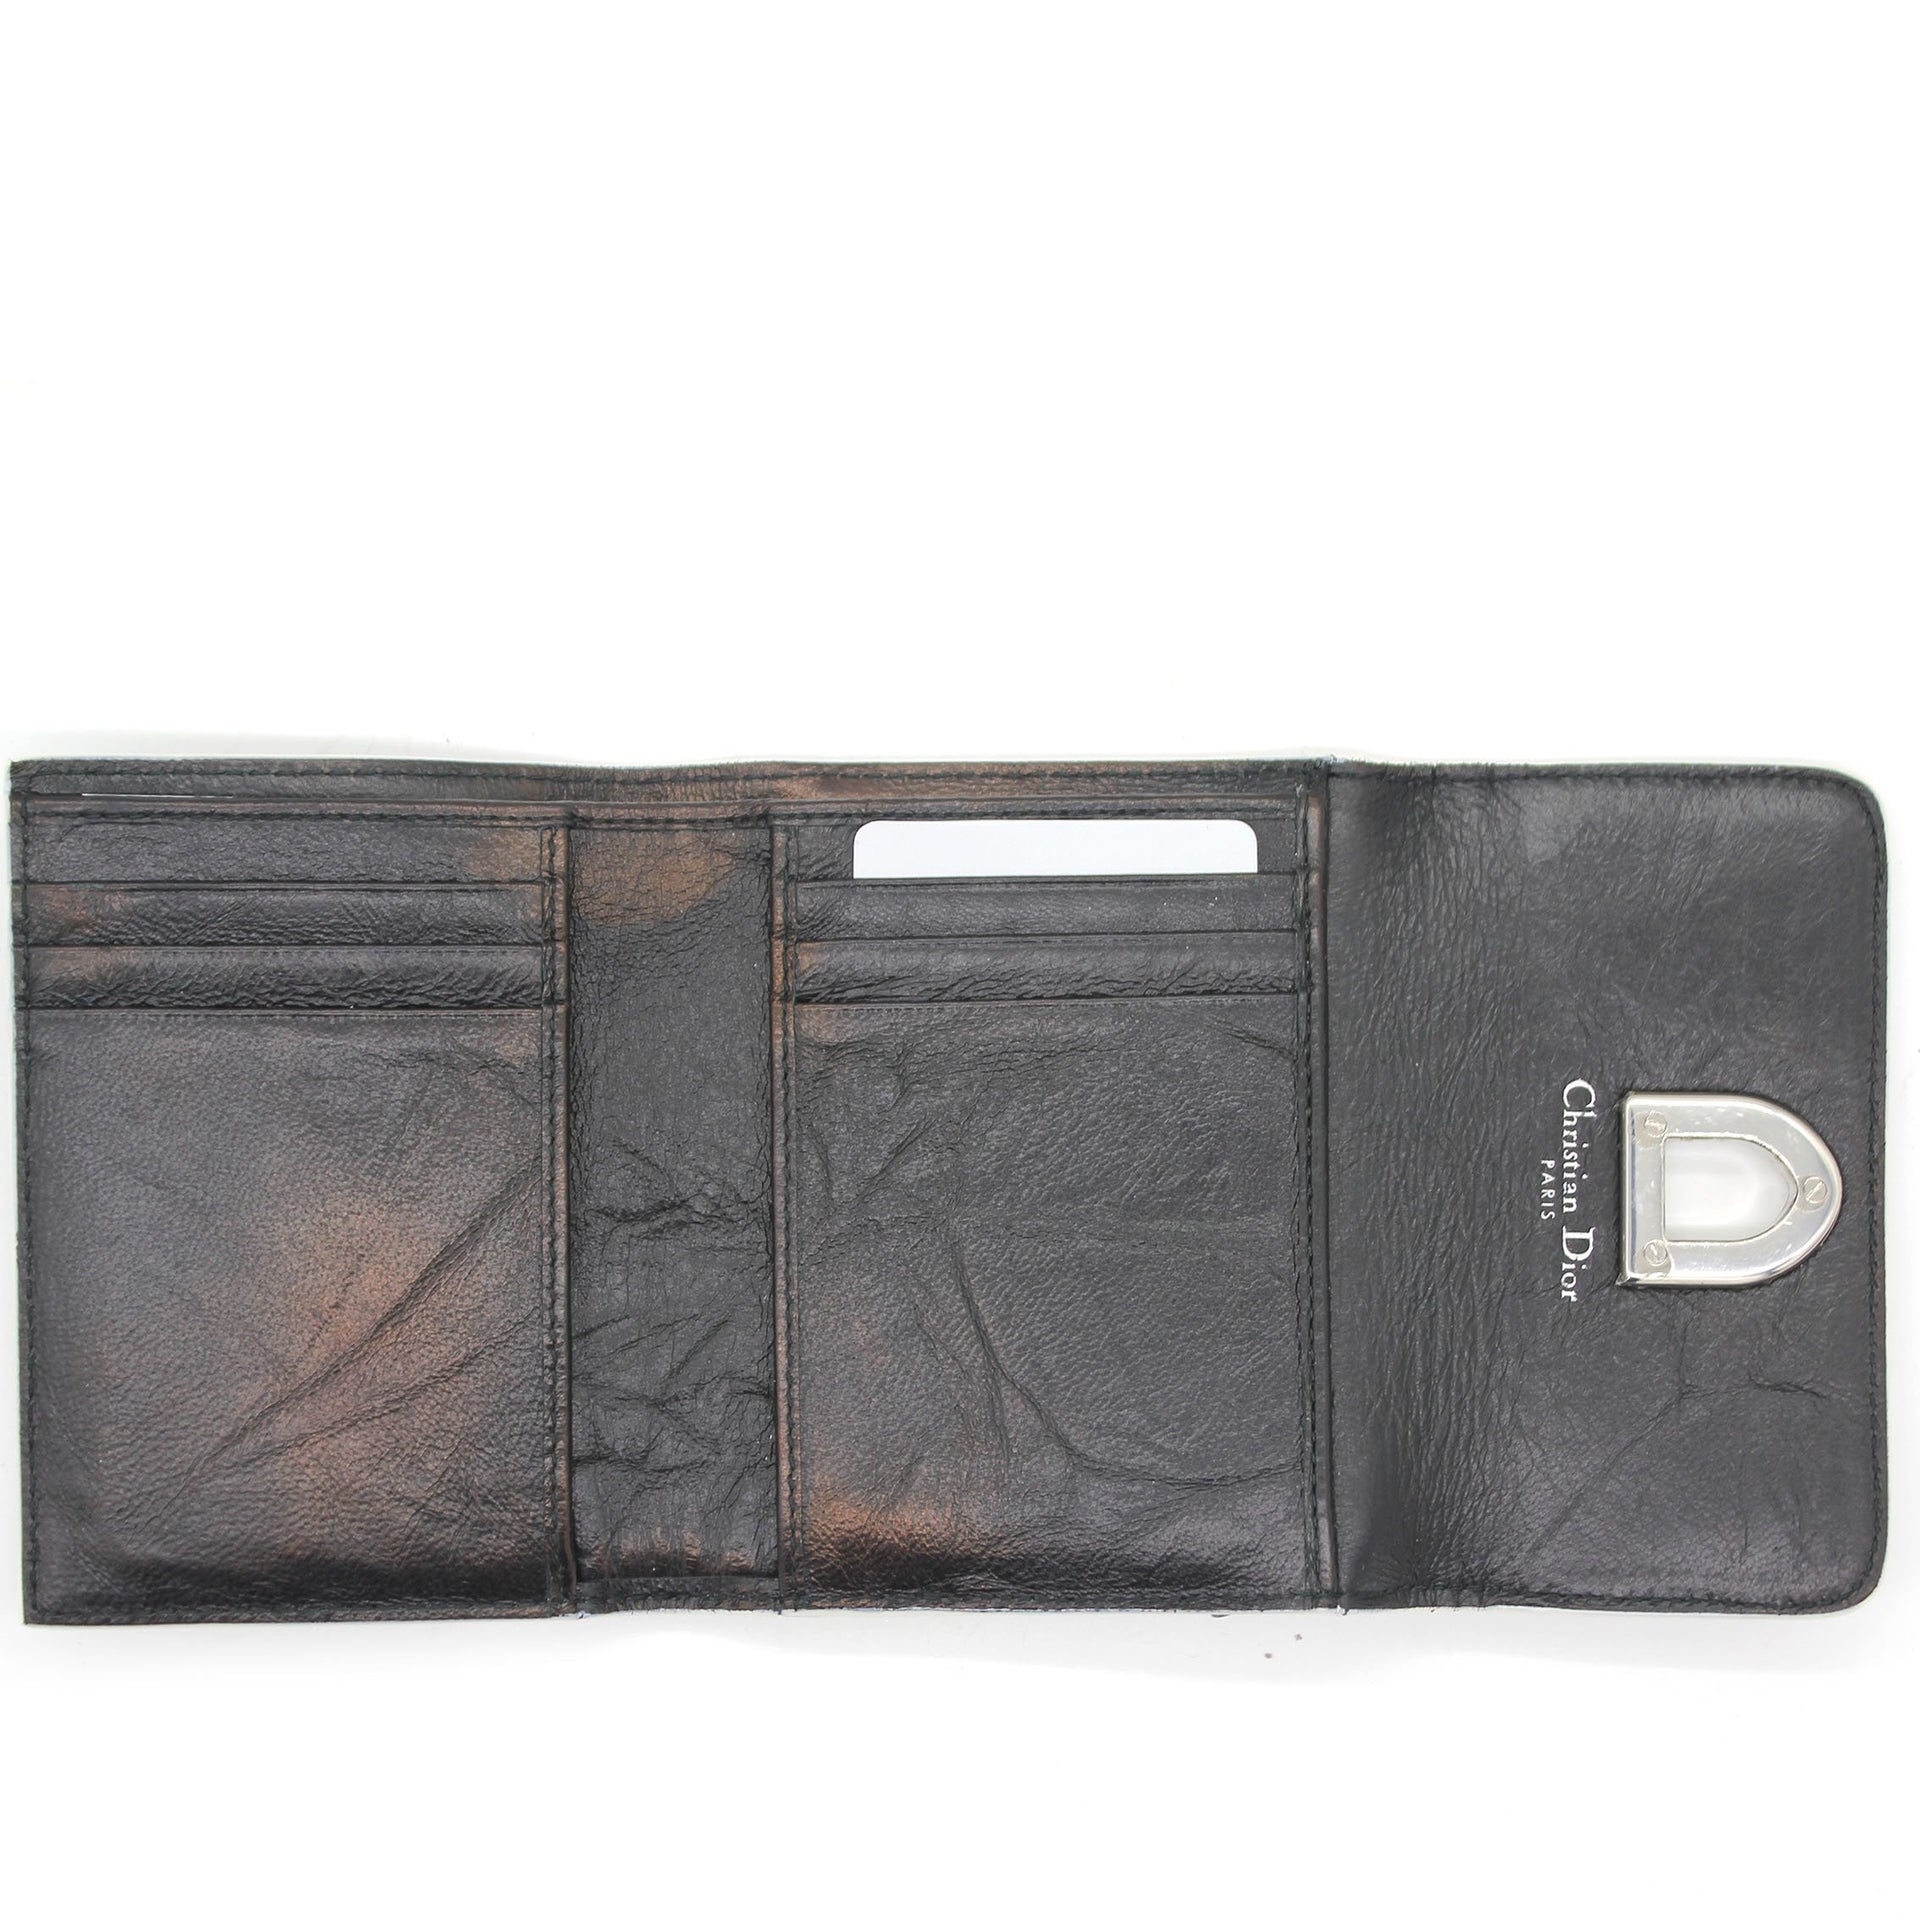 Patent Leather Diorama Wallet Black